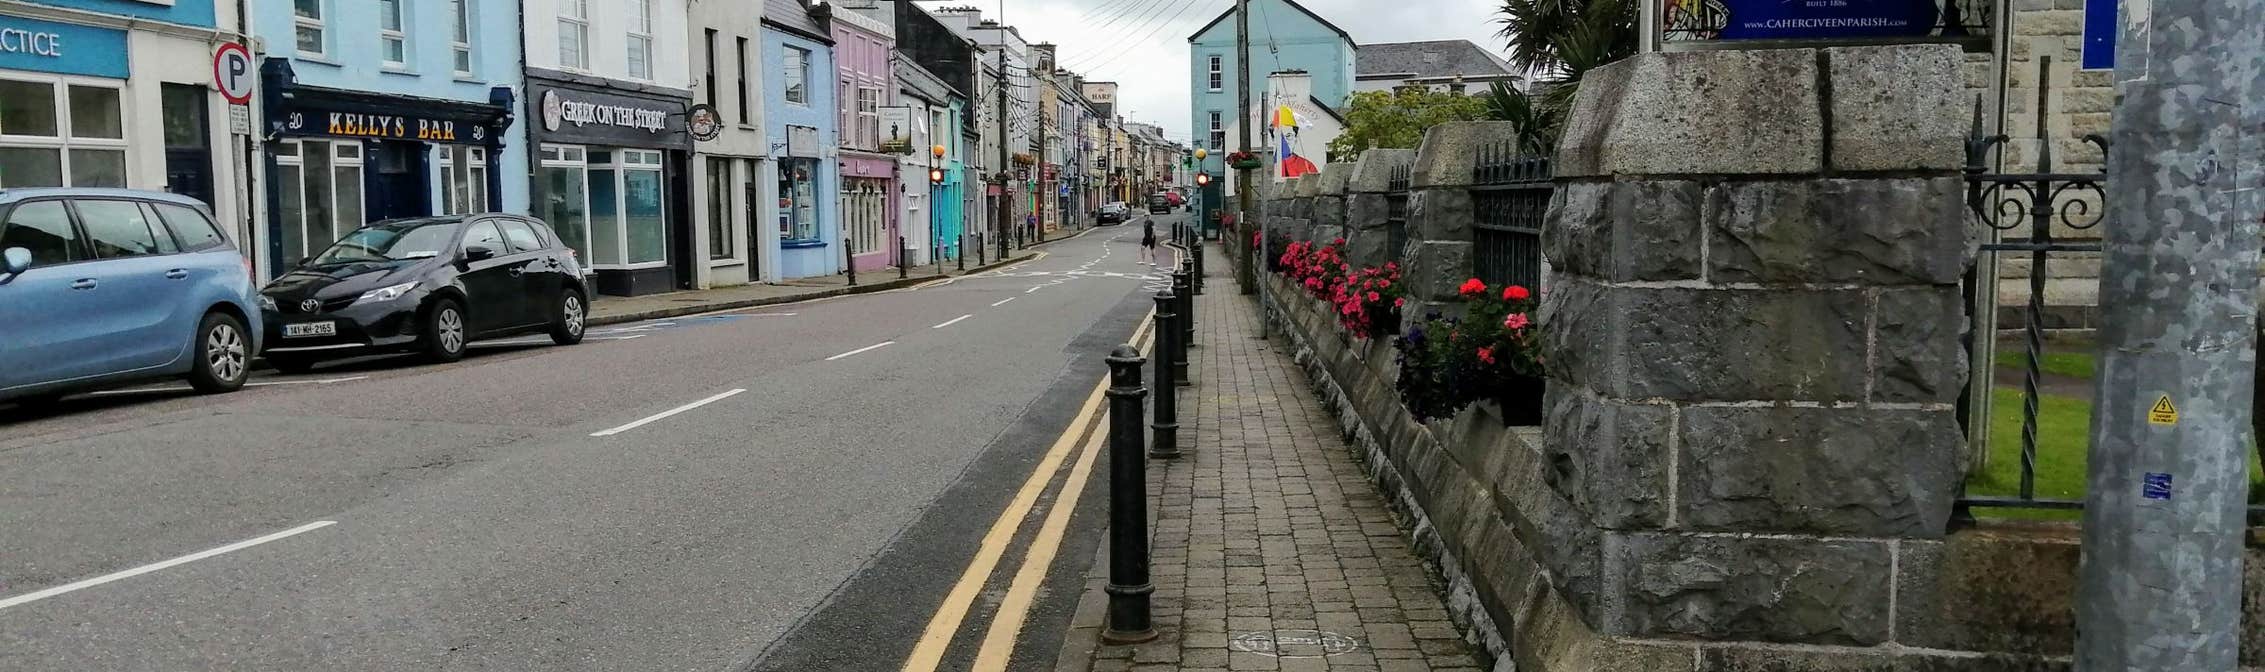 Image of Cahersiveen in County Kerry